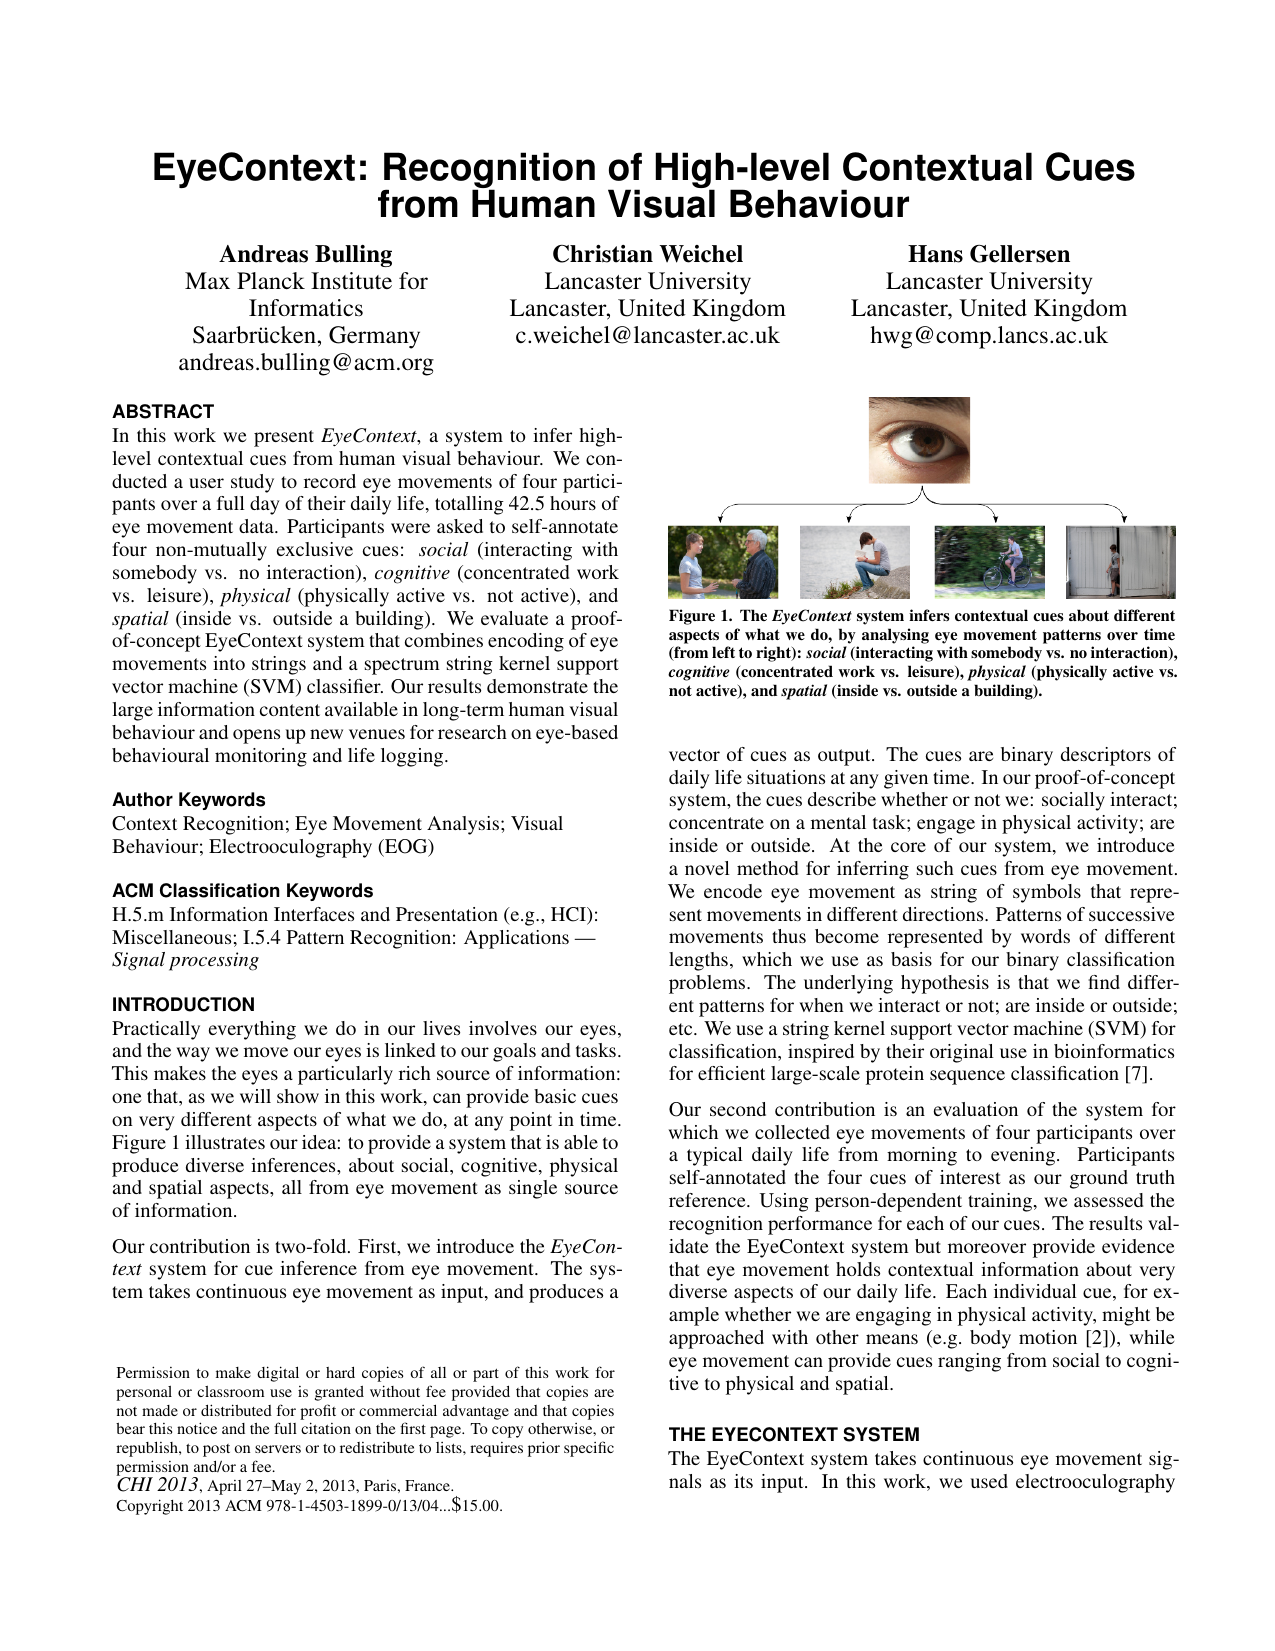 EyeContext: Recognition of High-level Contextual Cues from Human Visual Behaviour